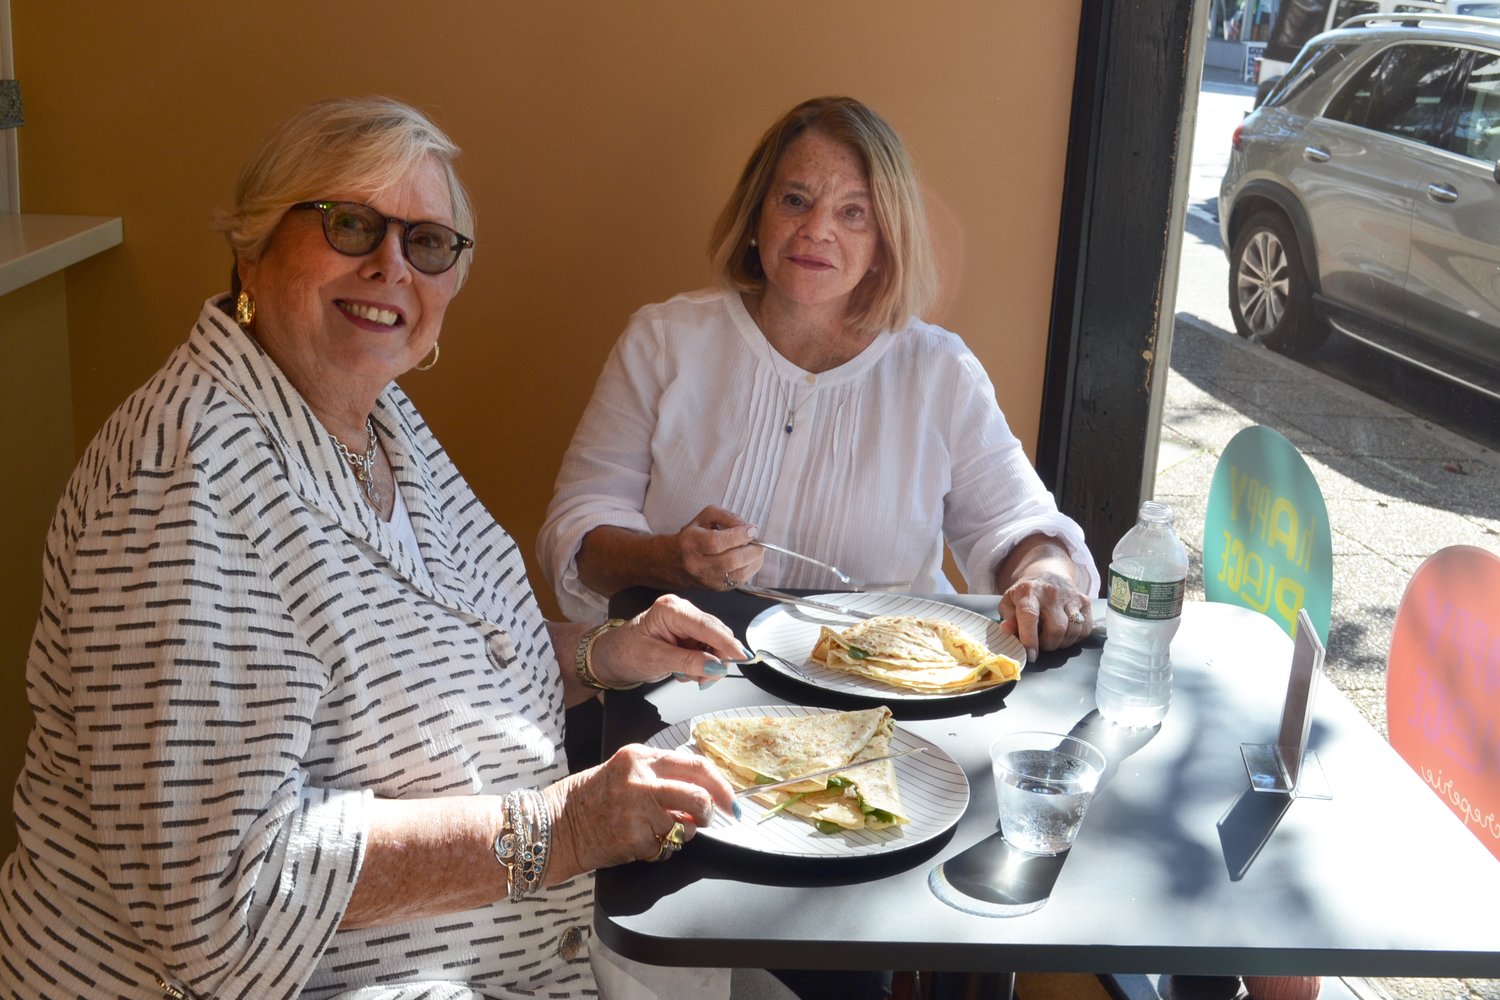 Audrey Field and Susan Maloney each enjoyed a savory crepe consisting of turkey, brie and spinach at Happy Place Creperie on Friday afternoon.